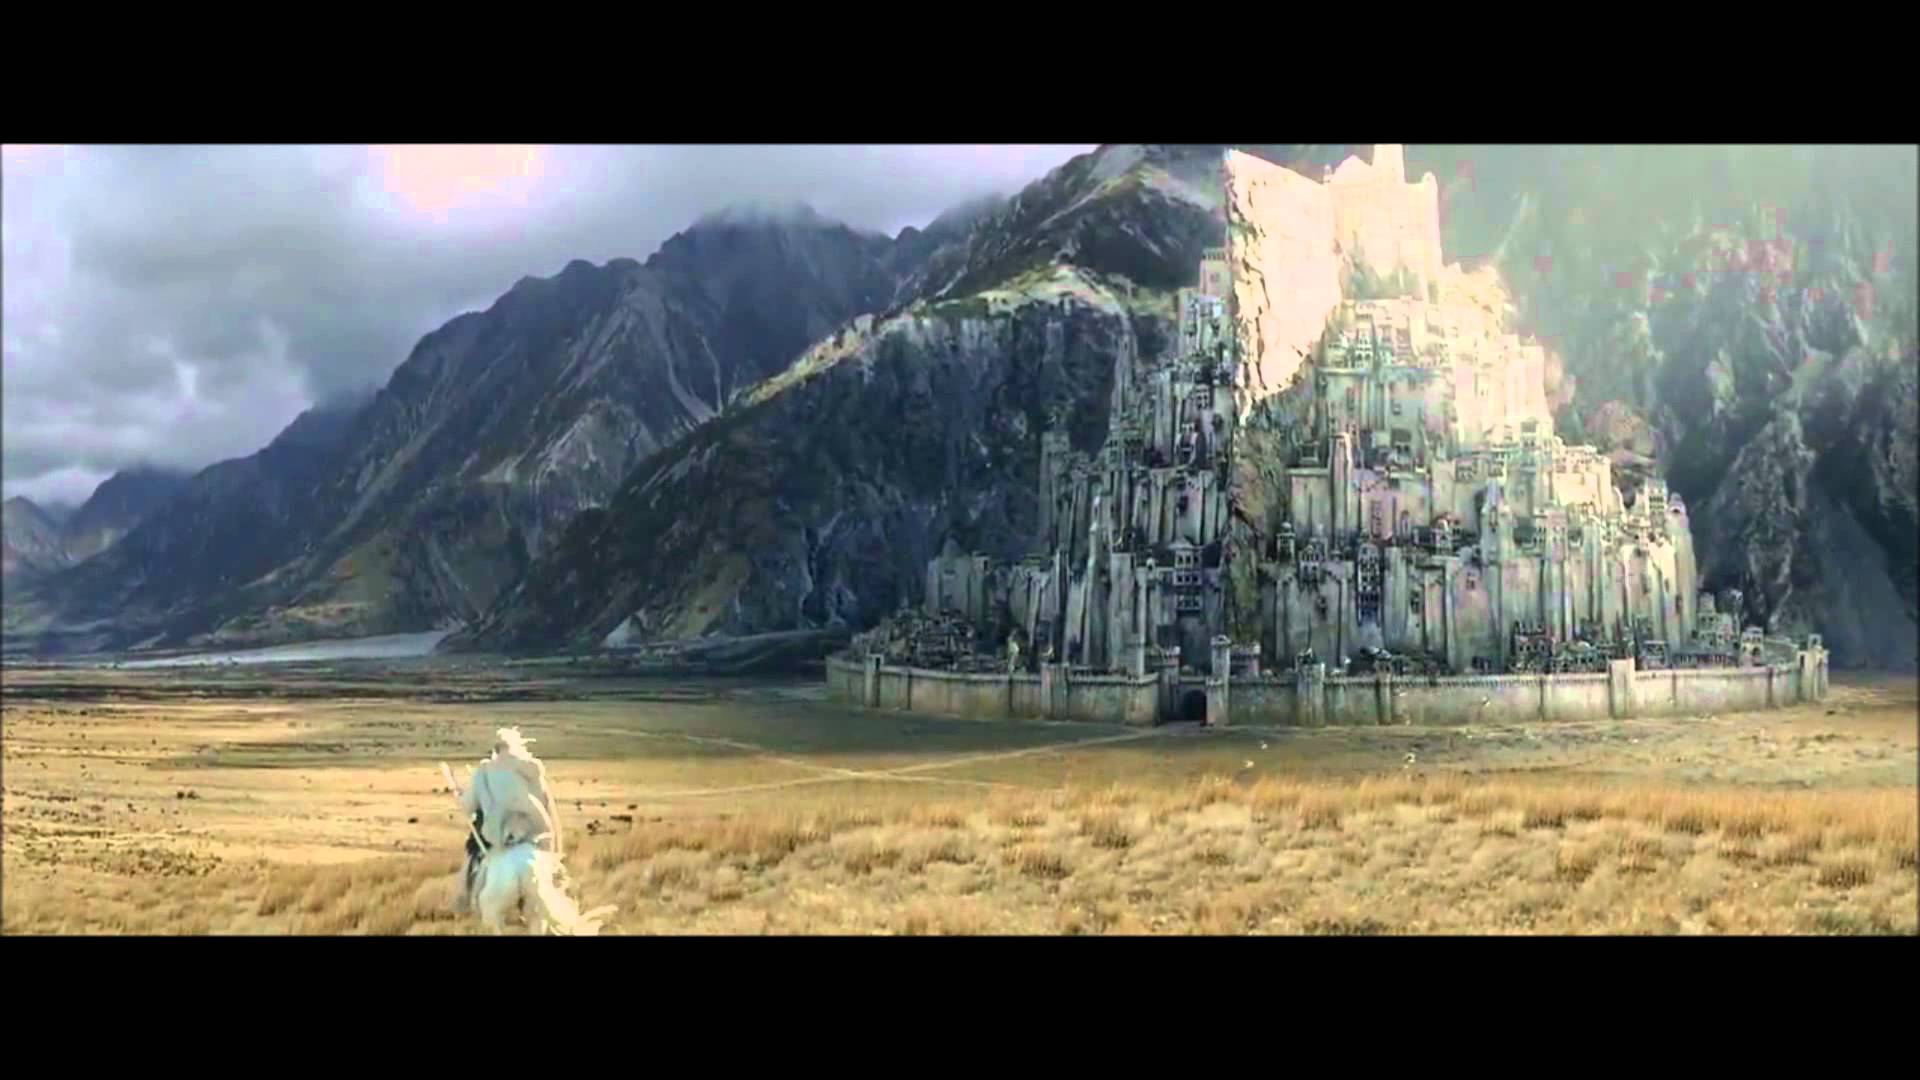 Minas Tirith HD Wallpapers and Backgrounds